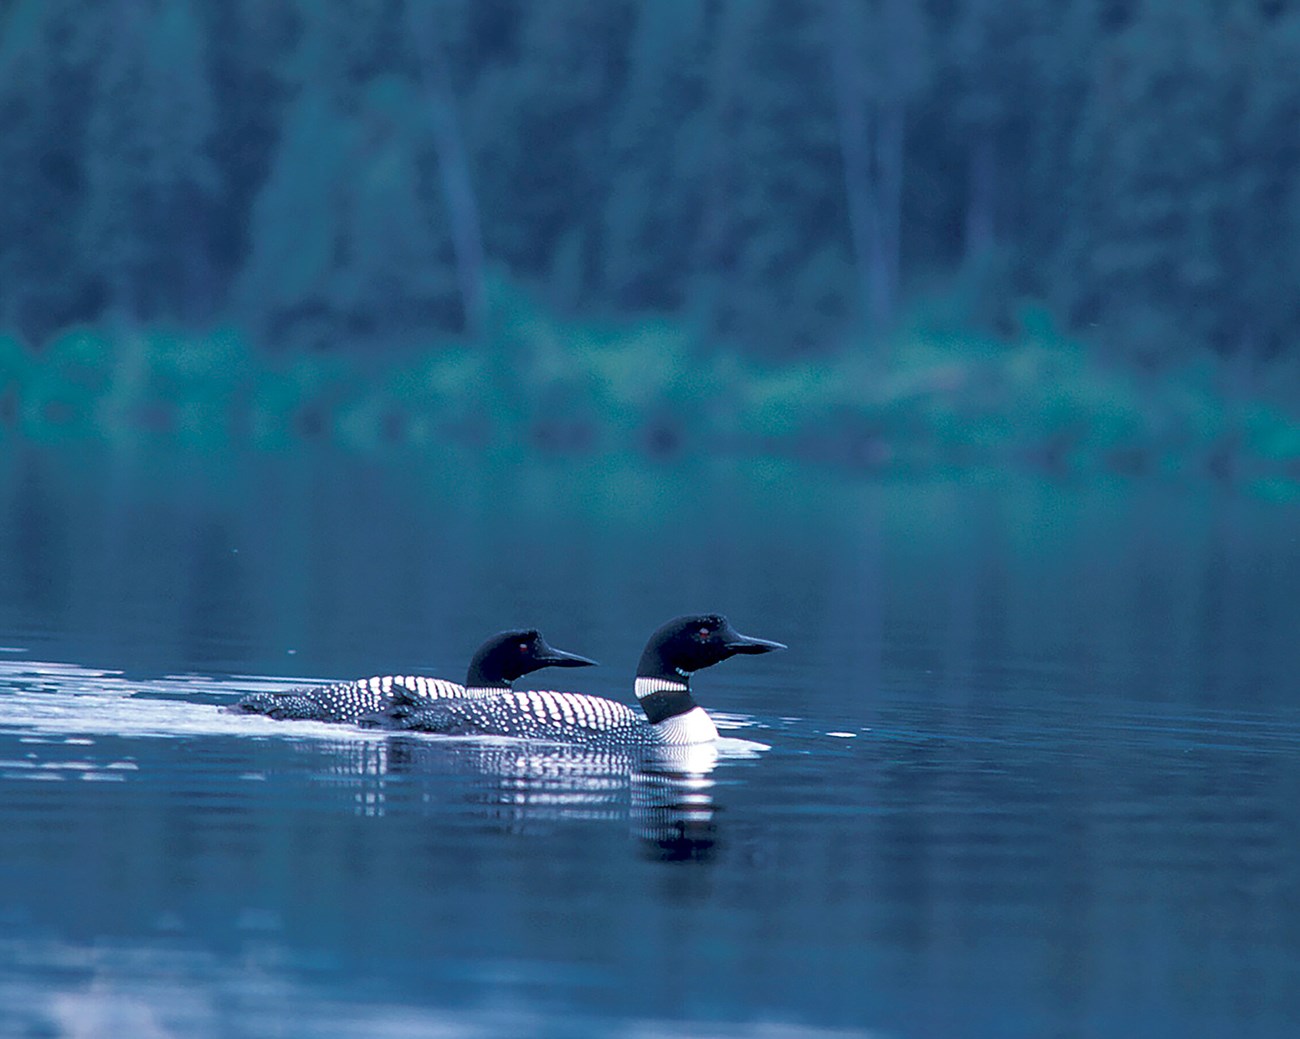 Large black and white birds swimming in a deep blue lake